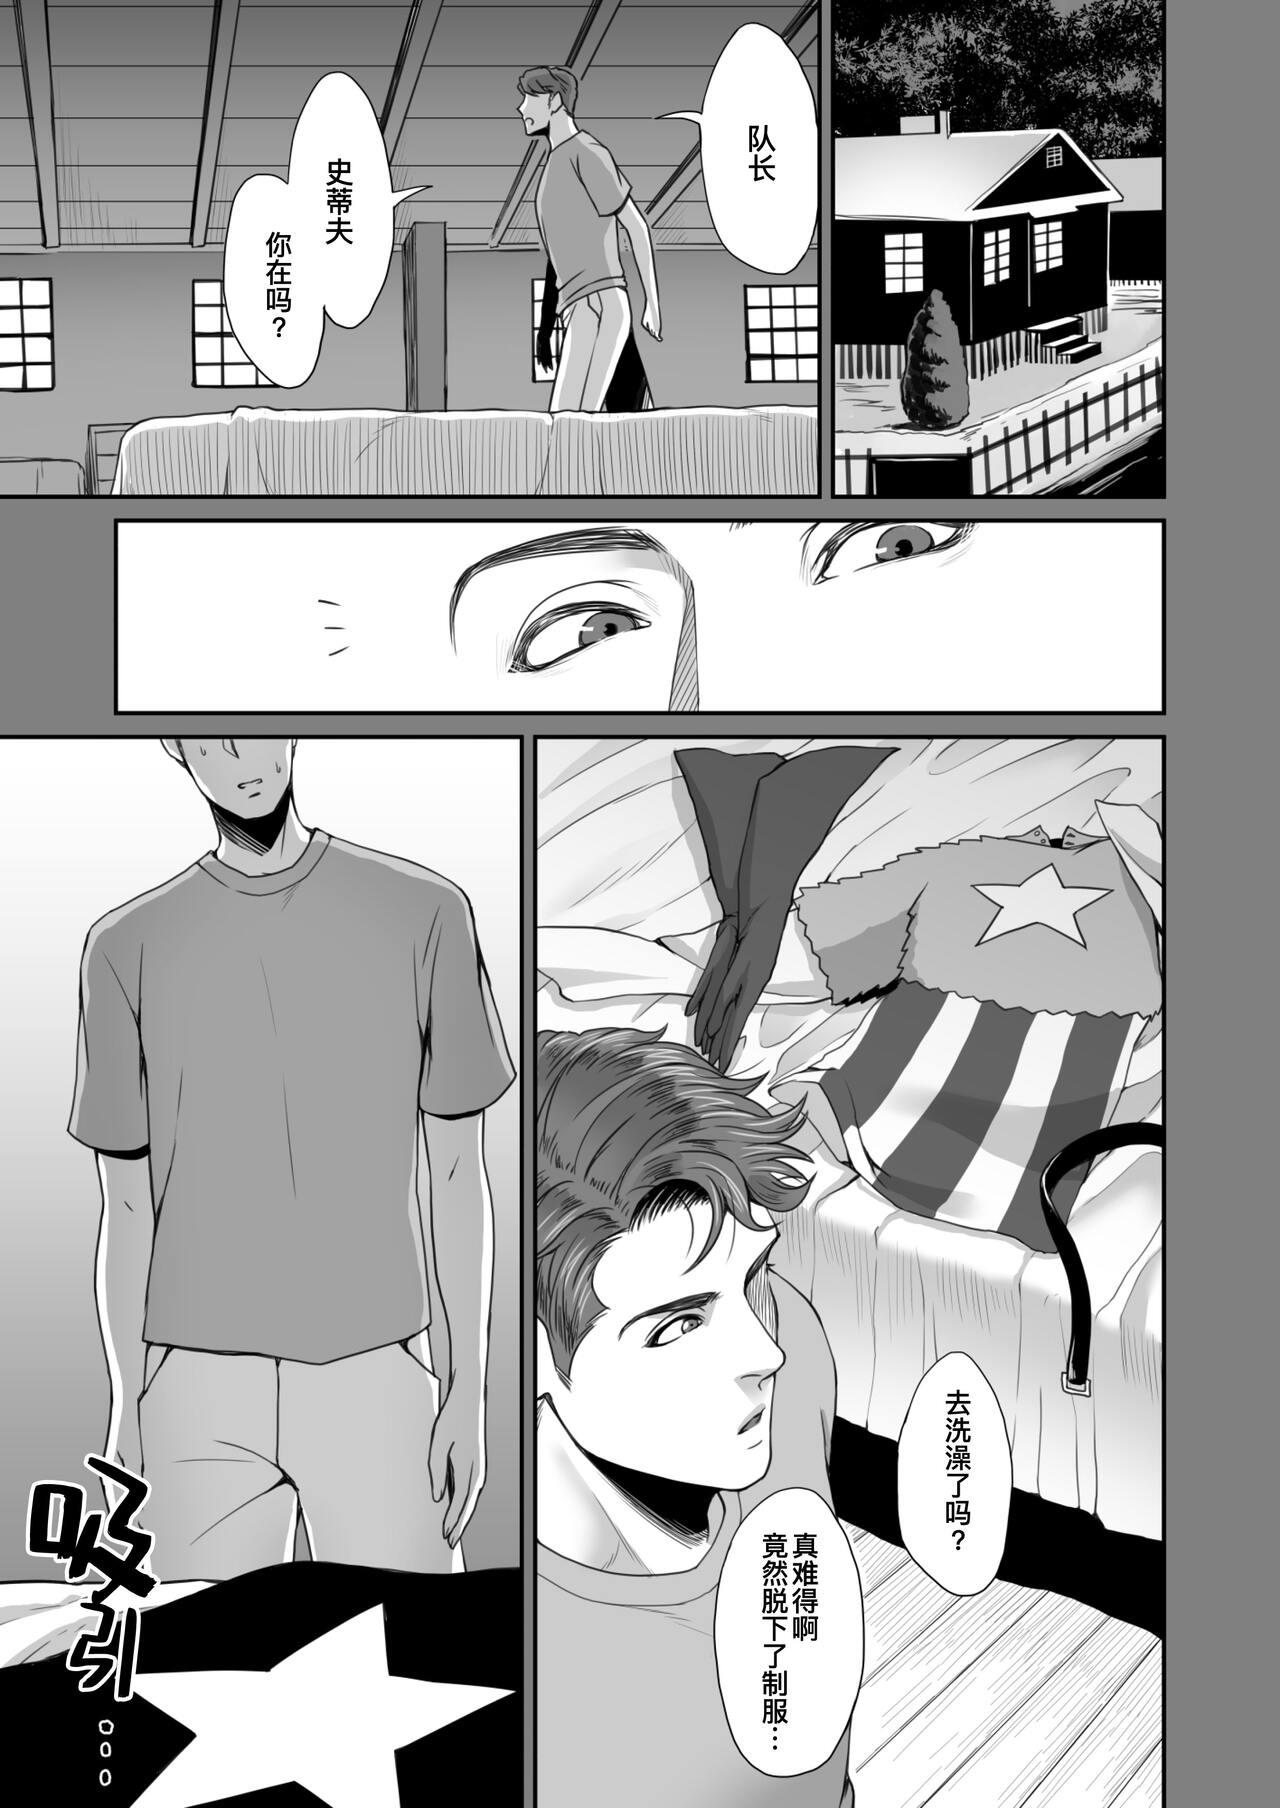 American NO HEROES Our love and hate relationship | 不再需要英雄 - 关于我们之间的爱恨情仇 - Avengers Fake Tits - Page 3